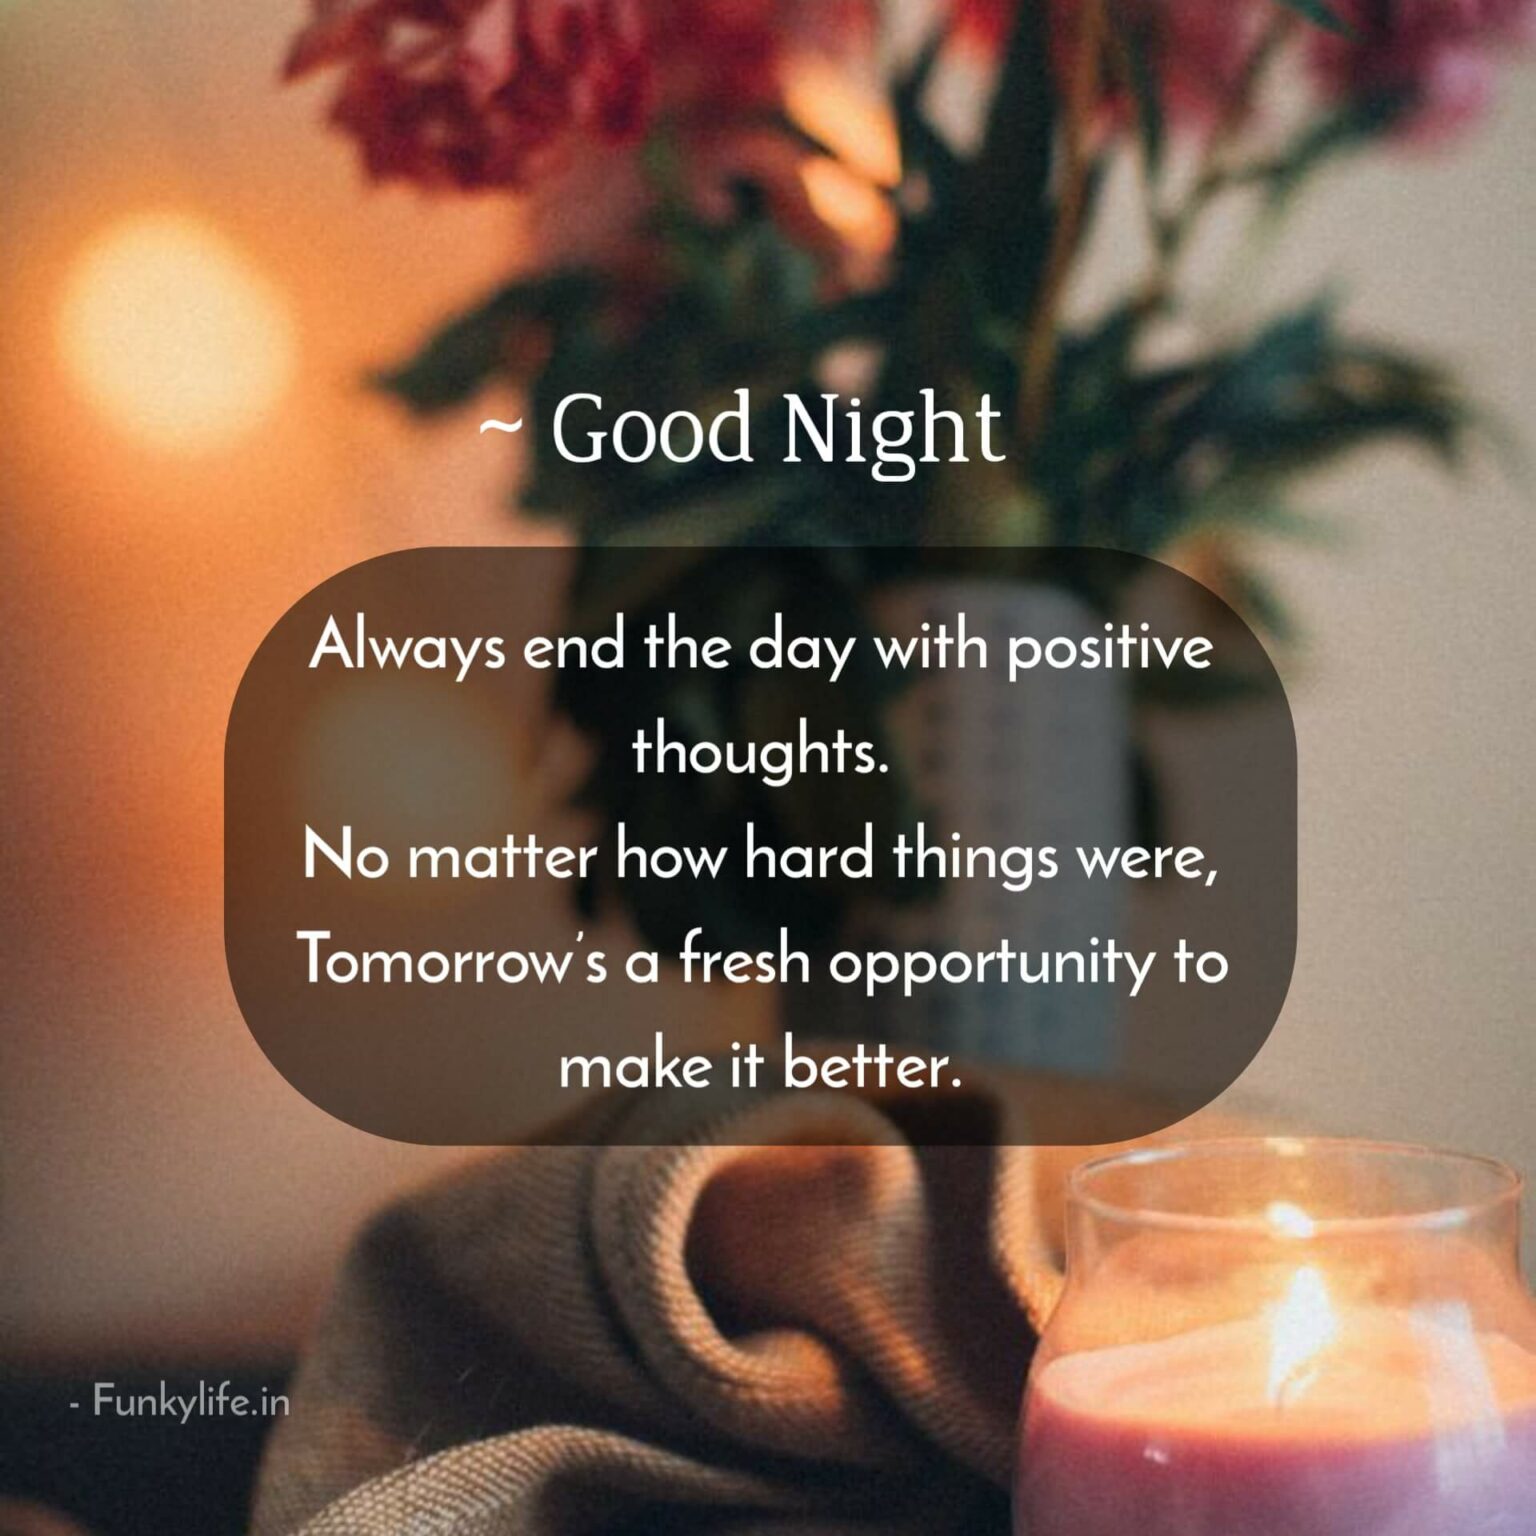 Good Night Quotes | 120+ Beautiful Night Messages and images in English